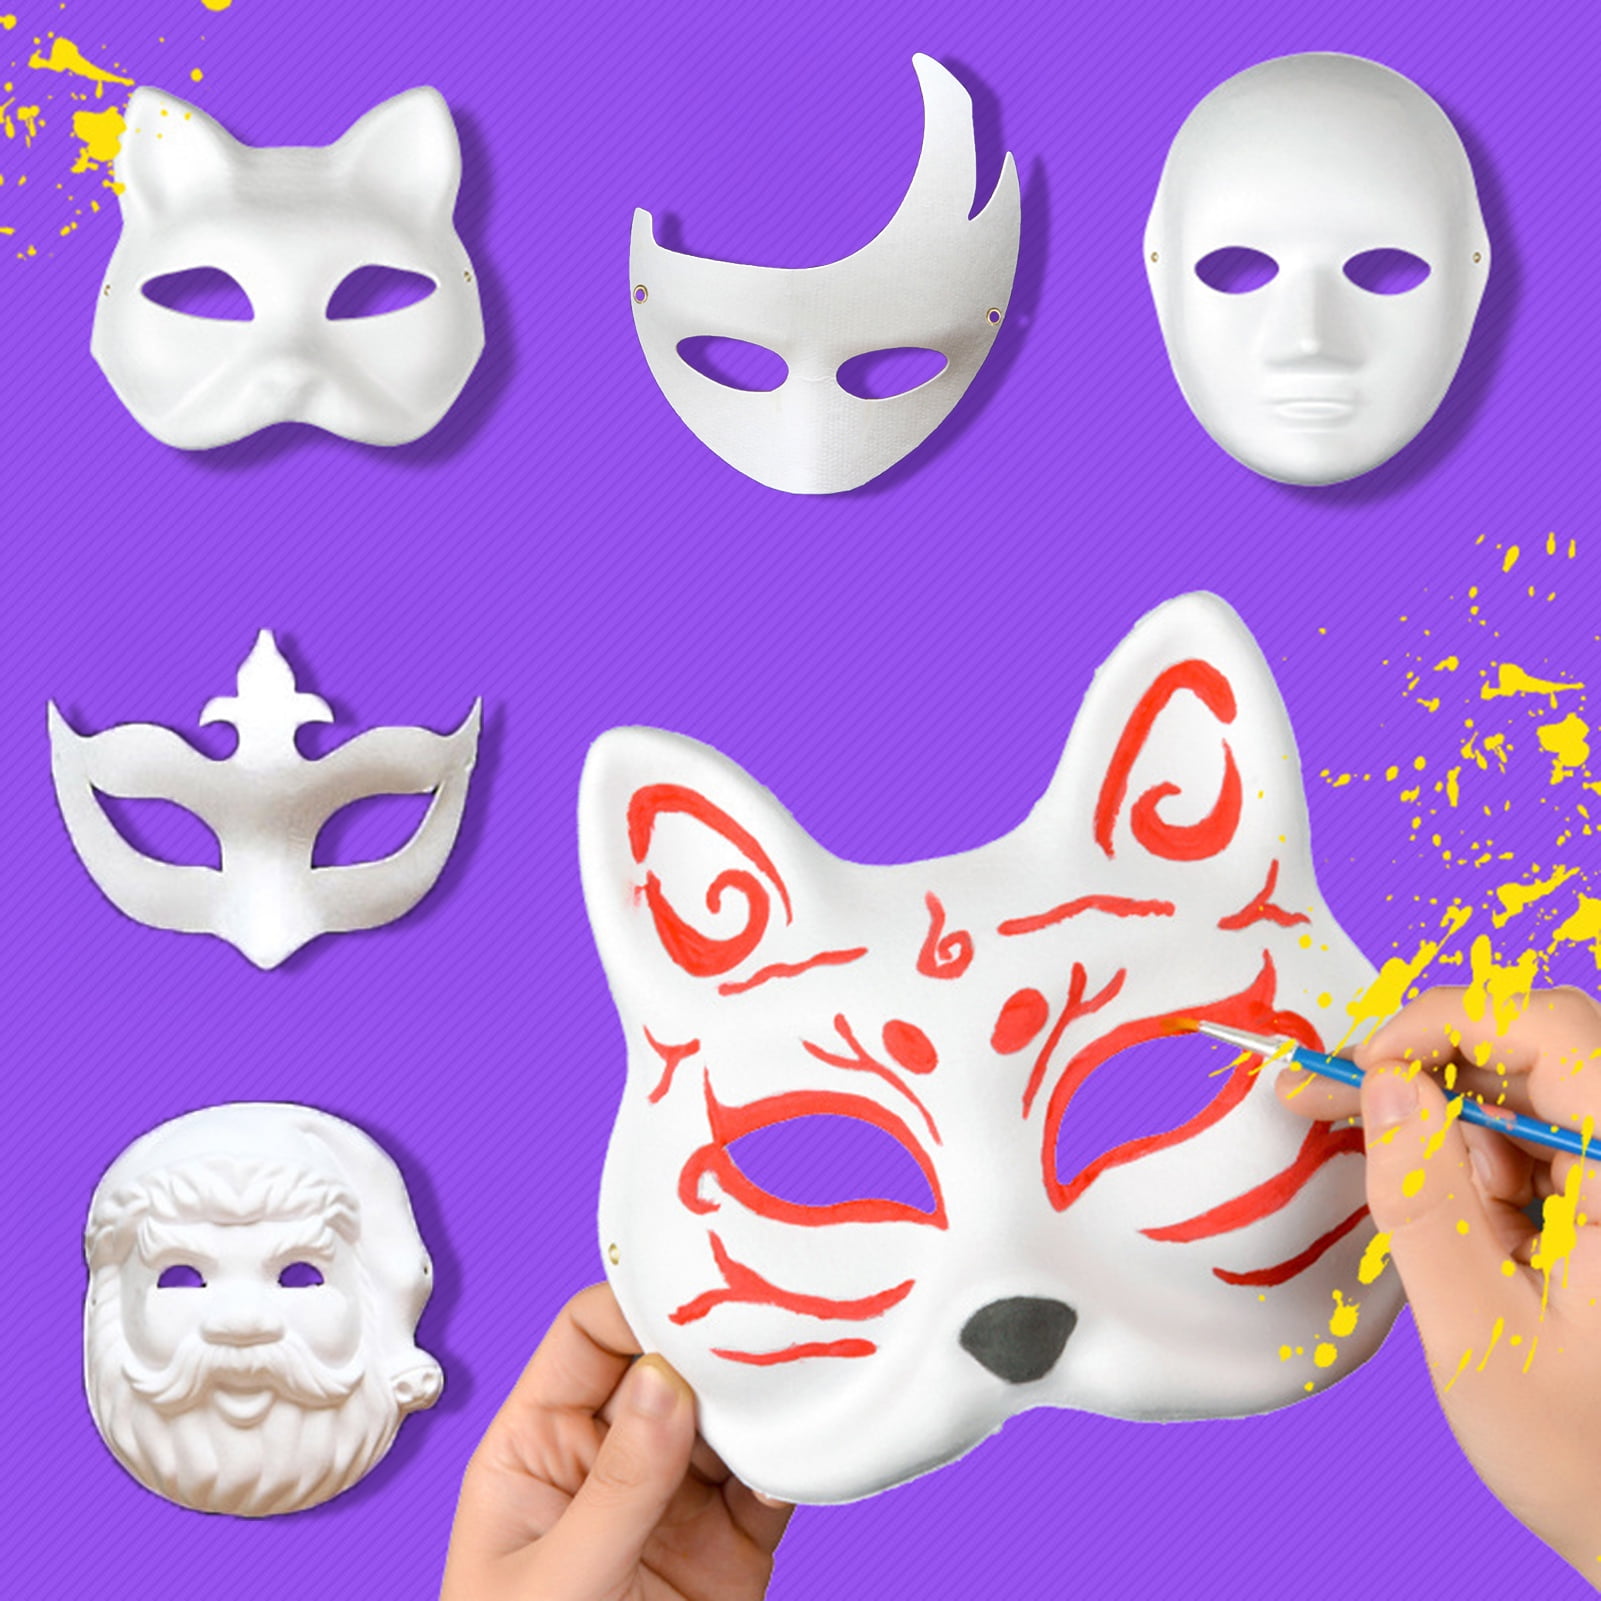 50 Pcs DIY Unpainted Masquerade Mask Paper Mache Mask DIY Full Face Mask  White Craft Mask Blank Mask Cat Mask to Decorate for Art Party Opera  Masquerade Cosplay Dance Halloween Christmas 10 Styles